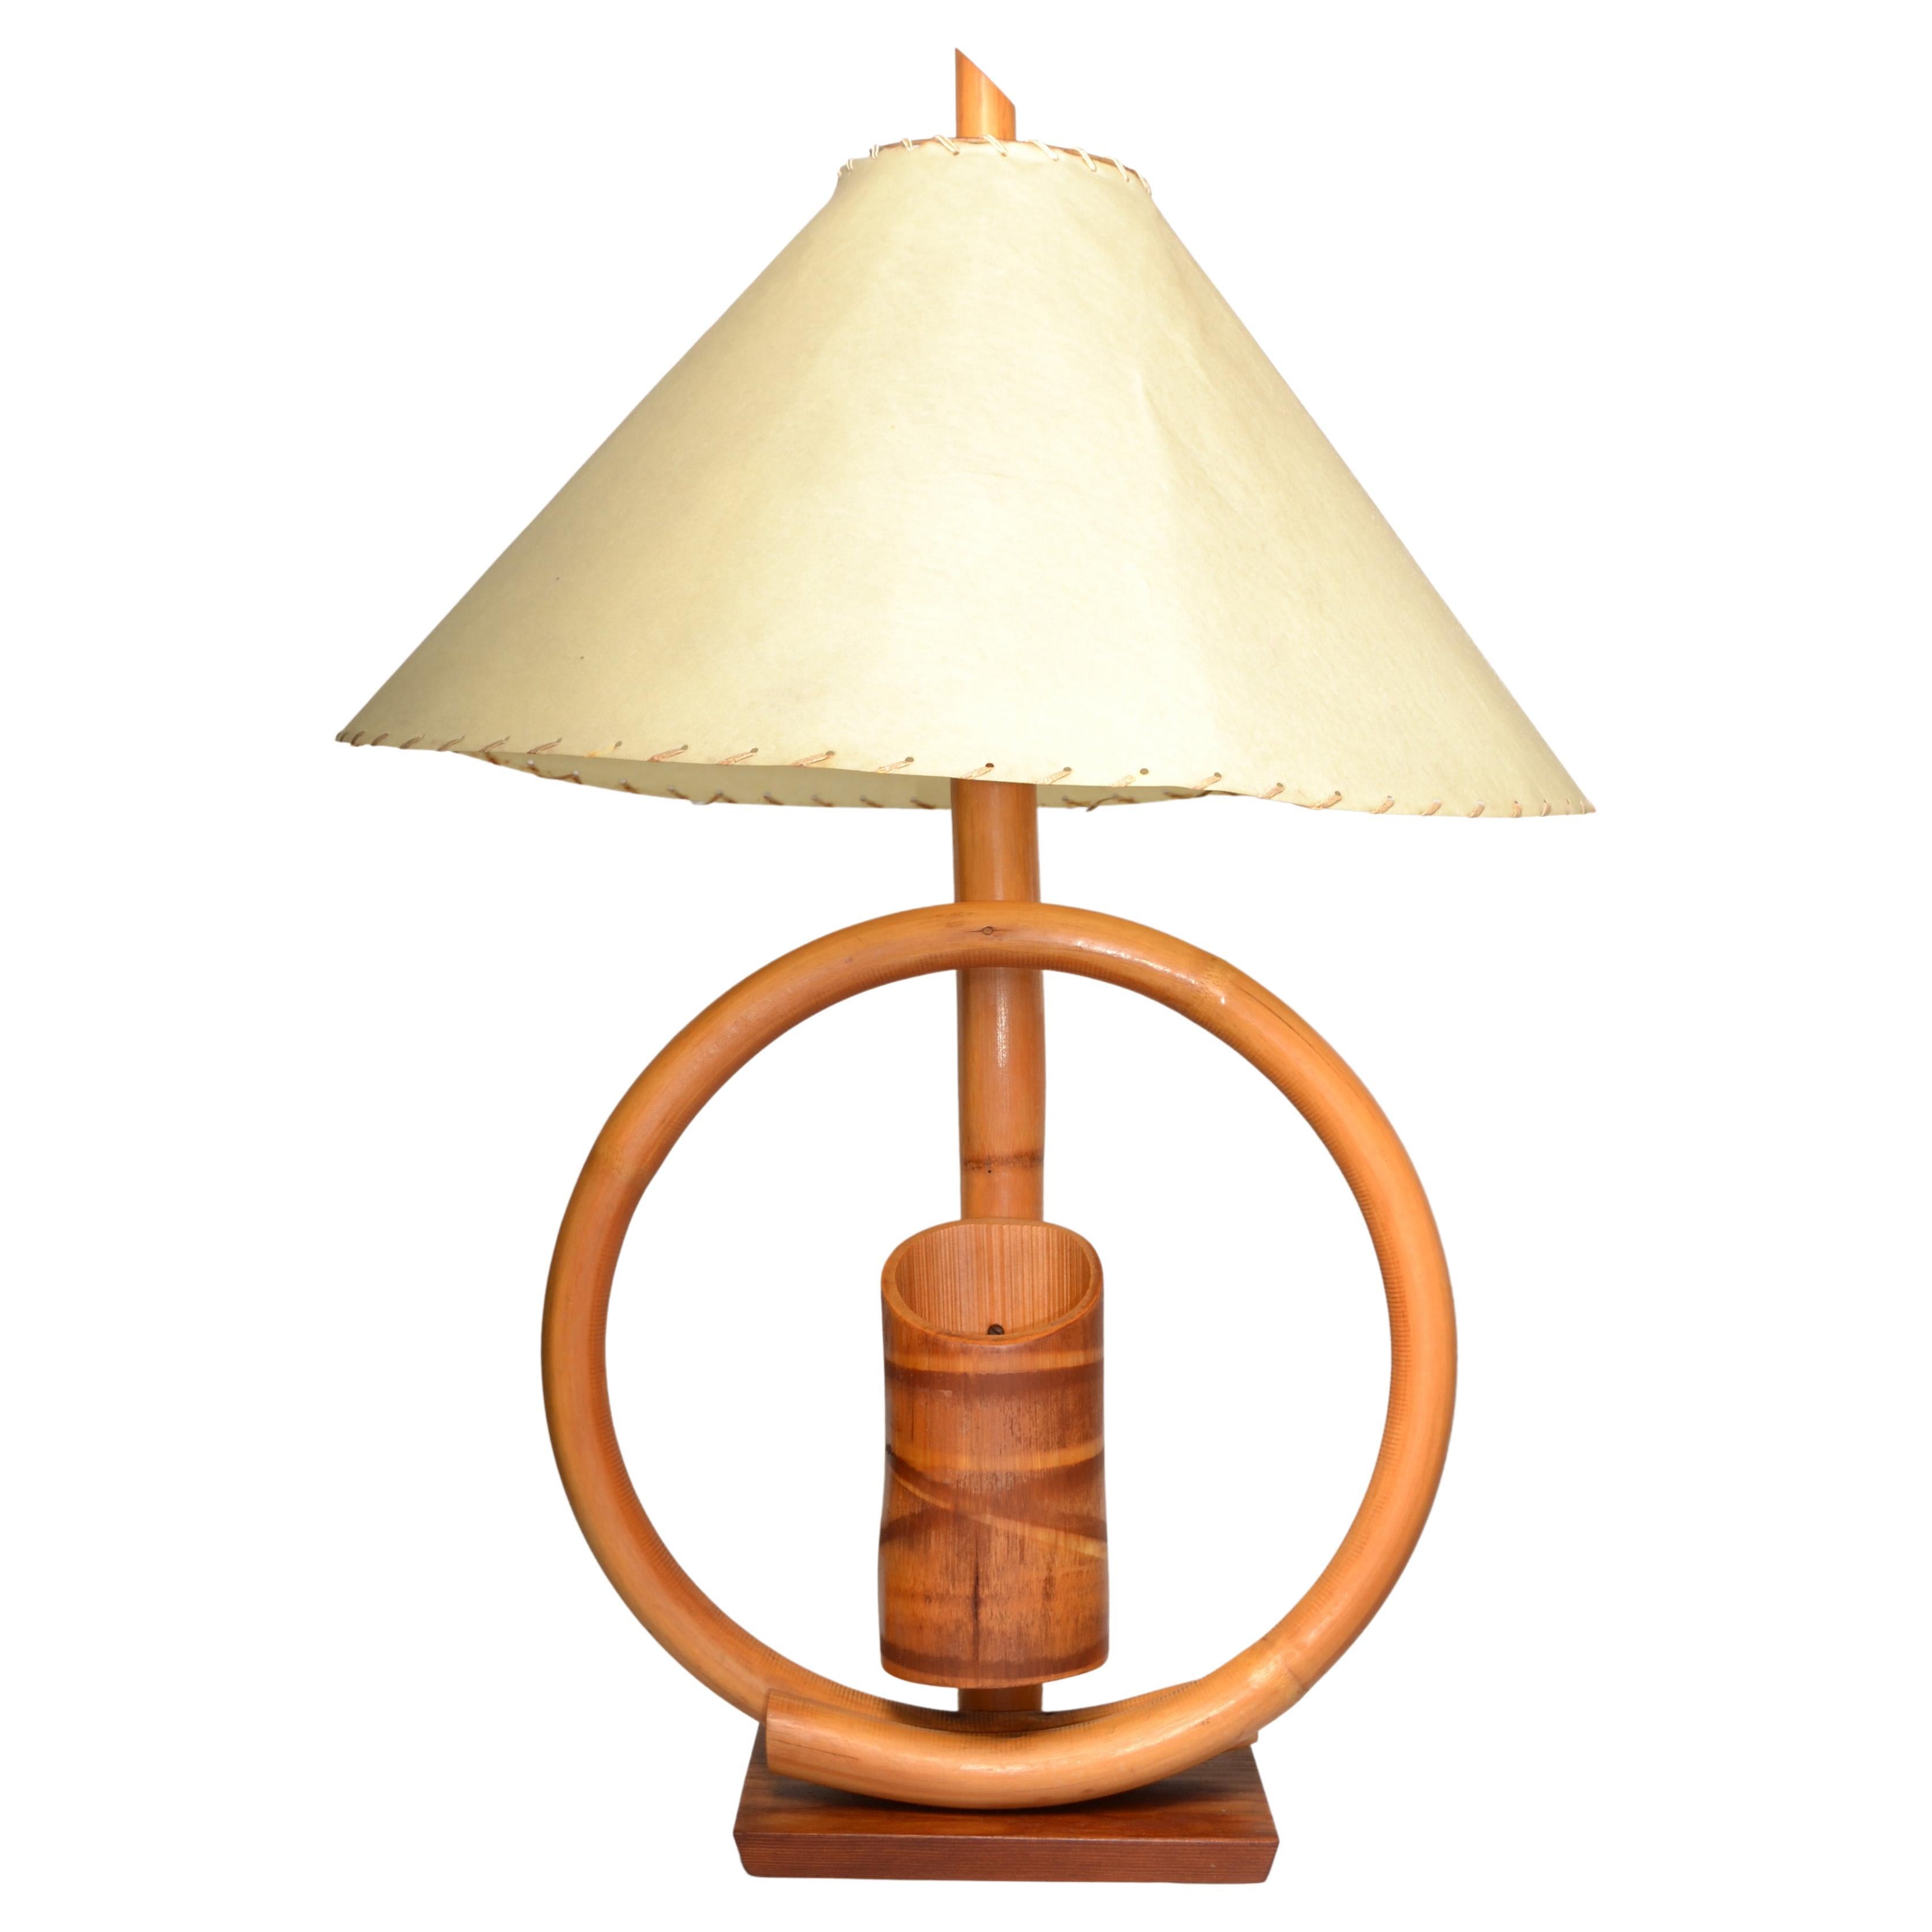 Boho Chic Coastal style bent Bamboo and Caning wrap Table Lamp with original hand-crafted Goatskin Shade. This rare Mid-Century Modern Lamp features one bent circle Bamboo arm with Pencil Holder in the Center and mounted on a dark rectangle